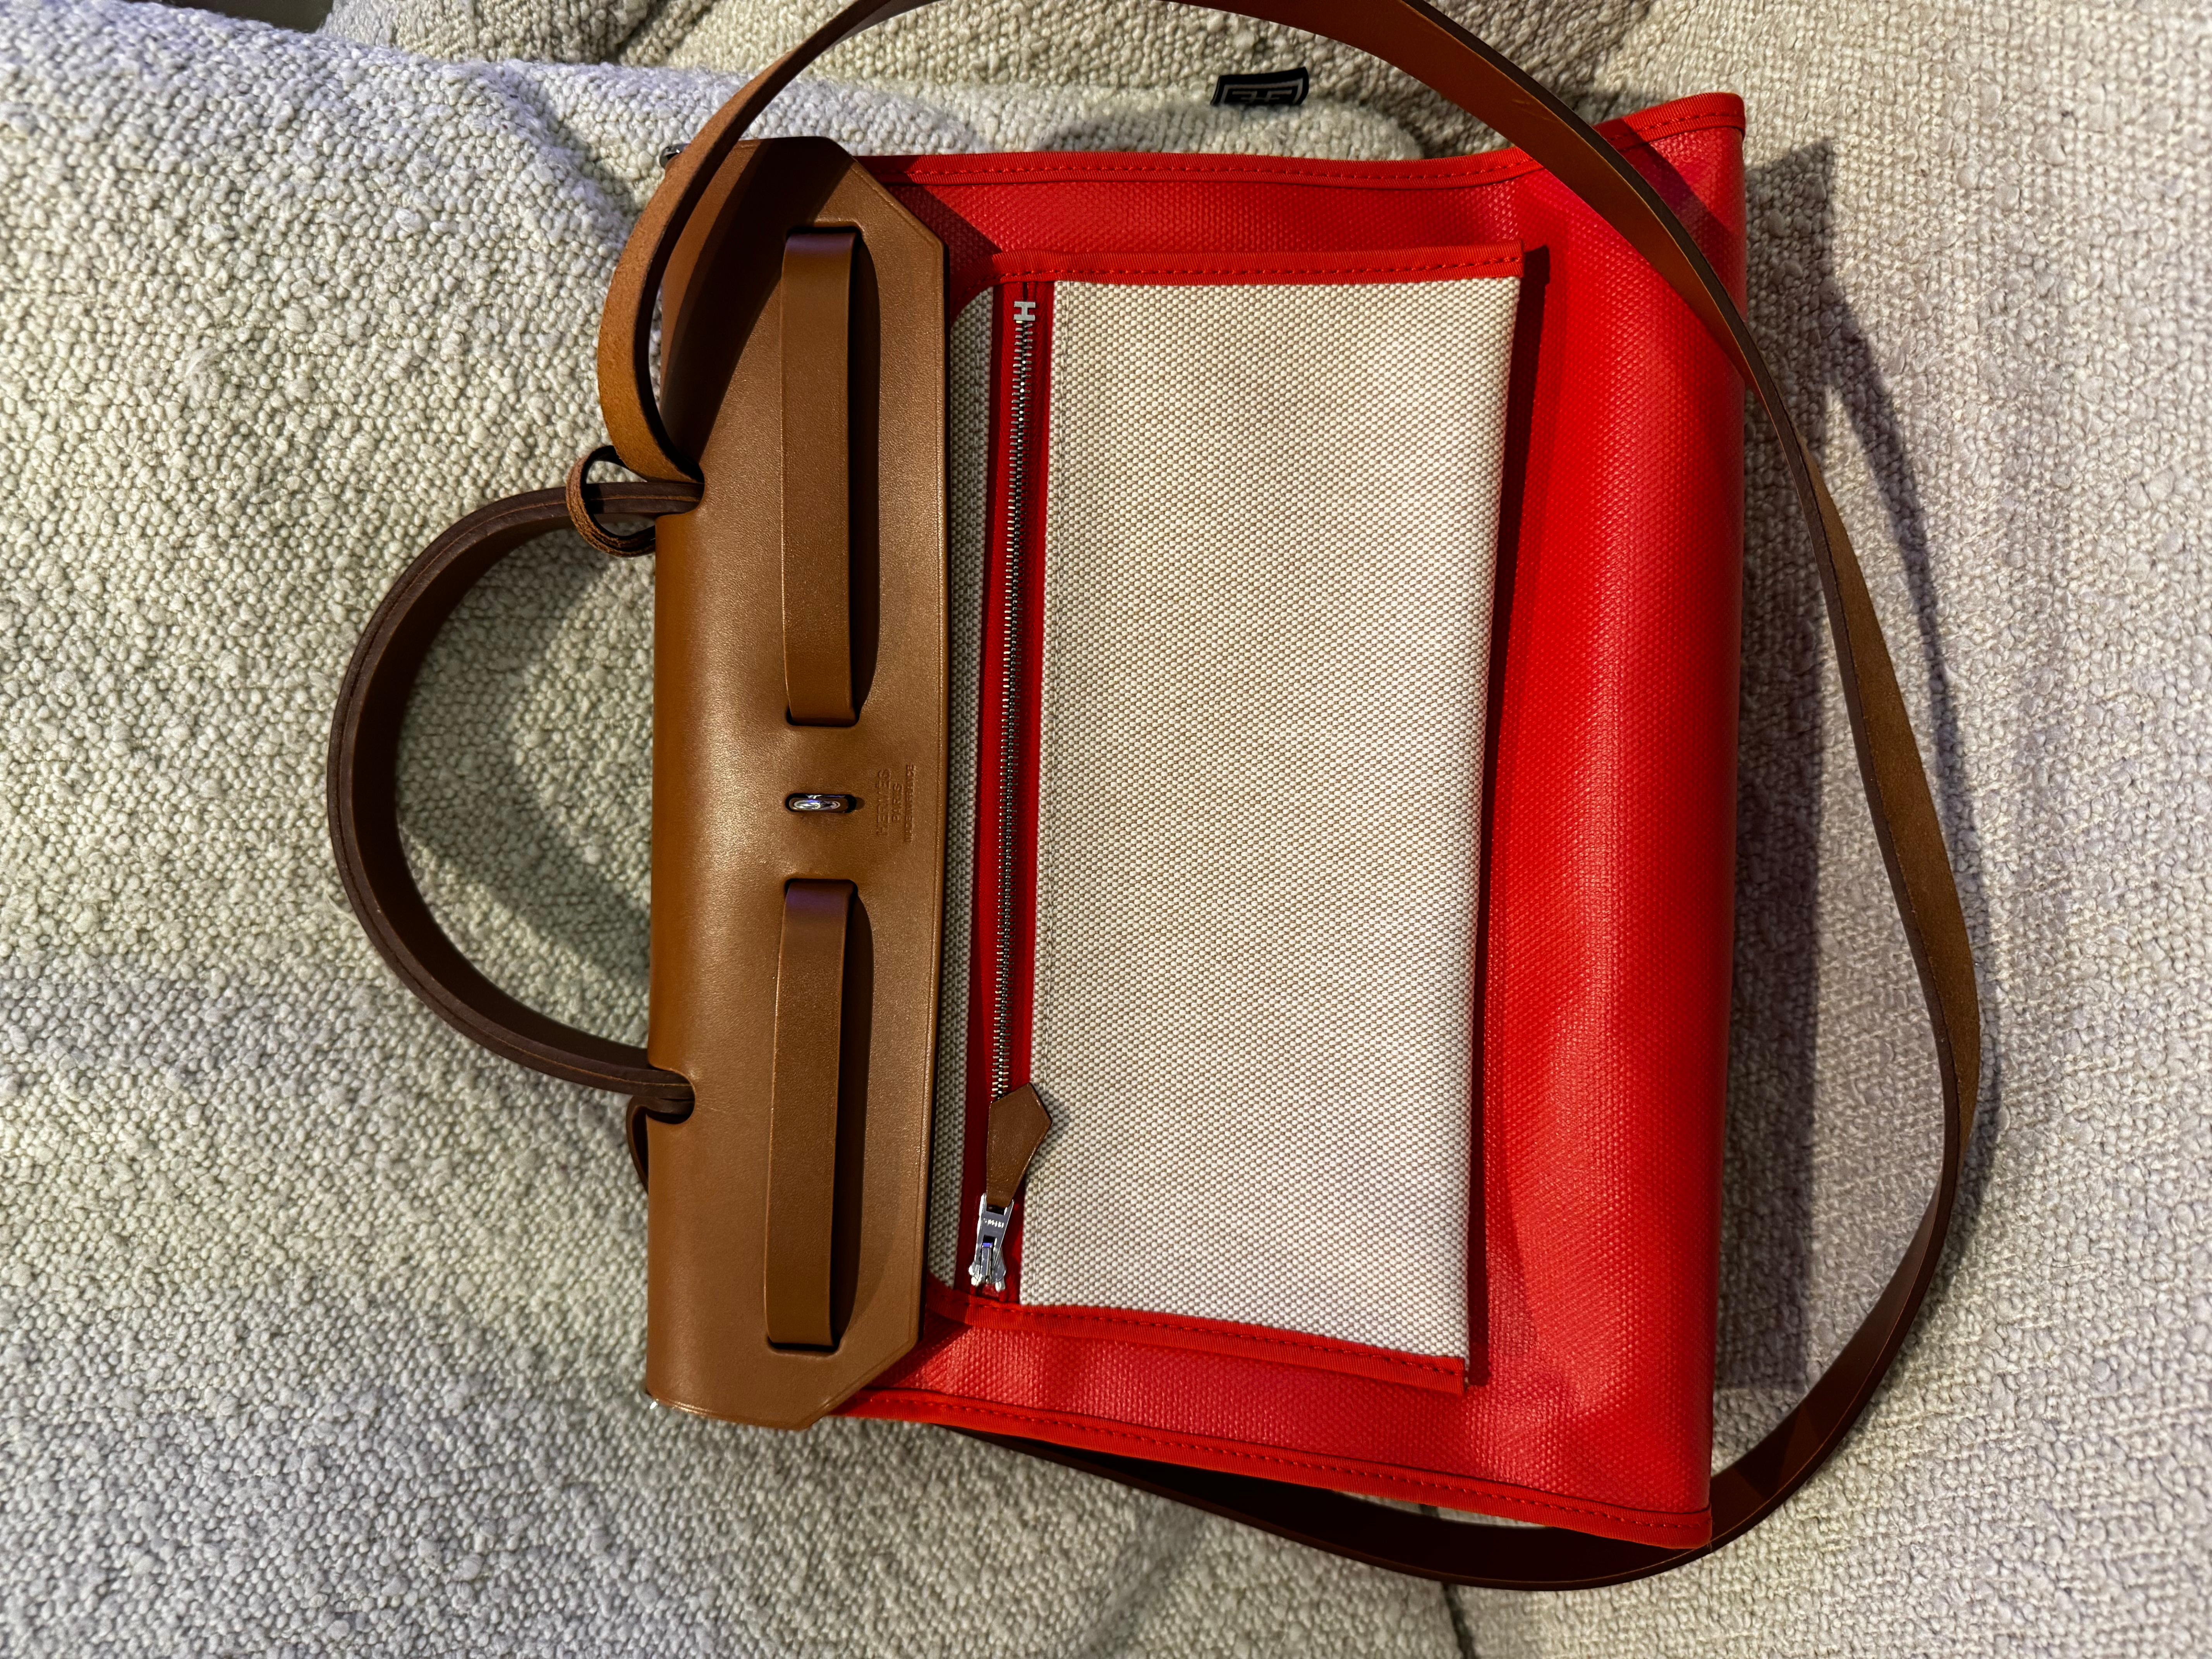 Hermès Herbag Zip 31  Fauve Vache and Orange Mecano Toile PM Palladium Hardware In Excellent Condition For Sale In London, England